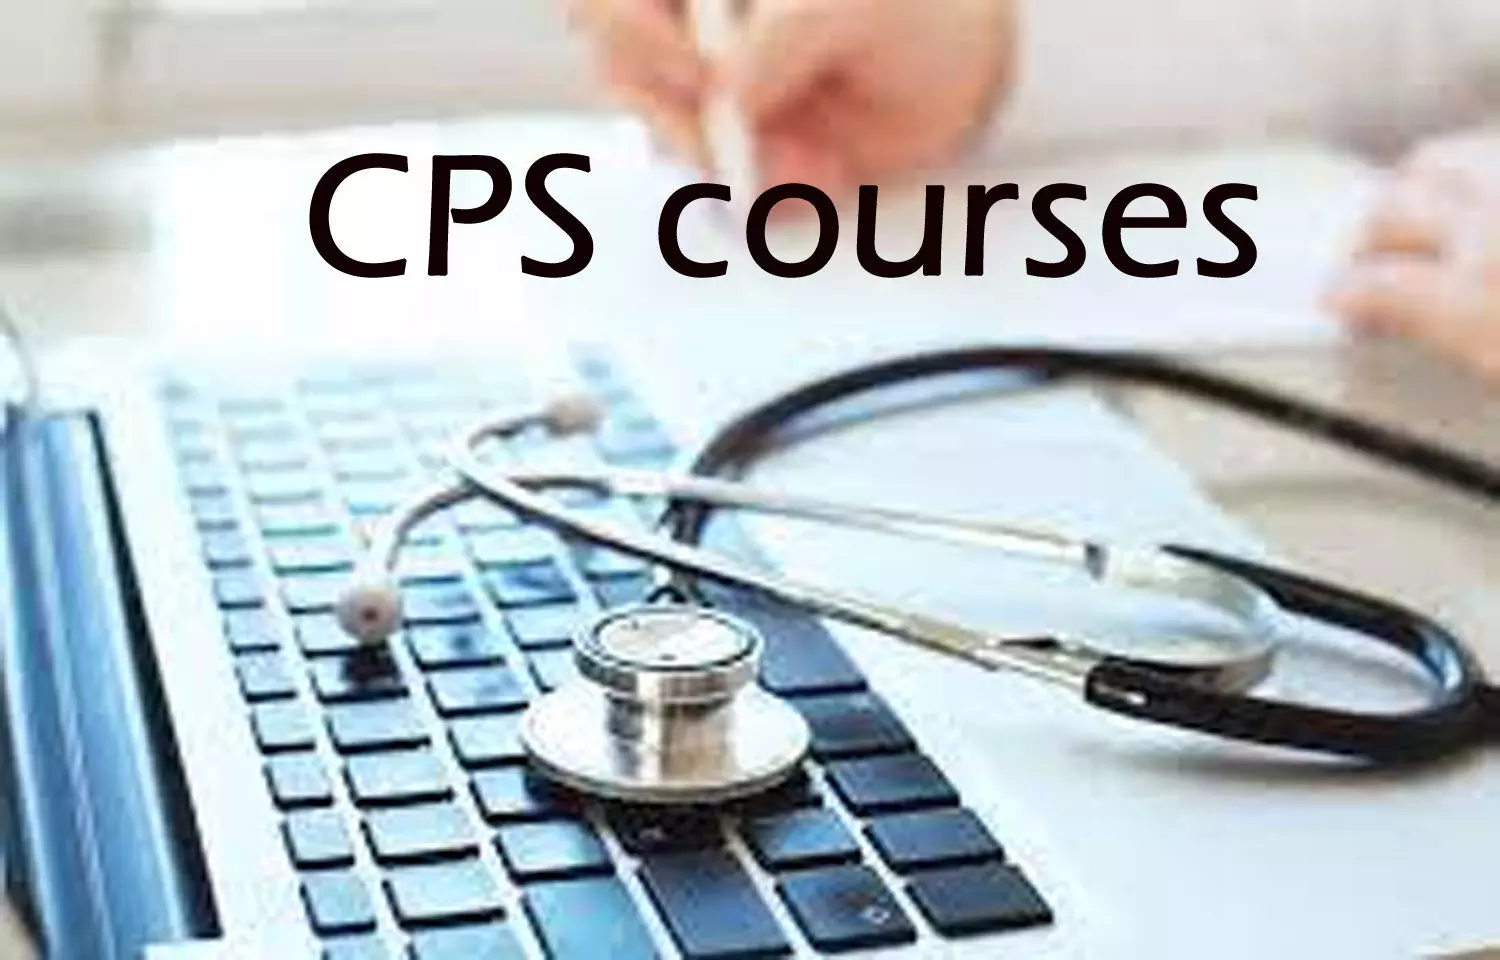 Only 3 CPS Diploma courses recognised, confirms Health Ministry